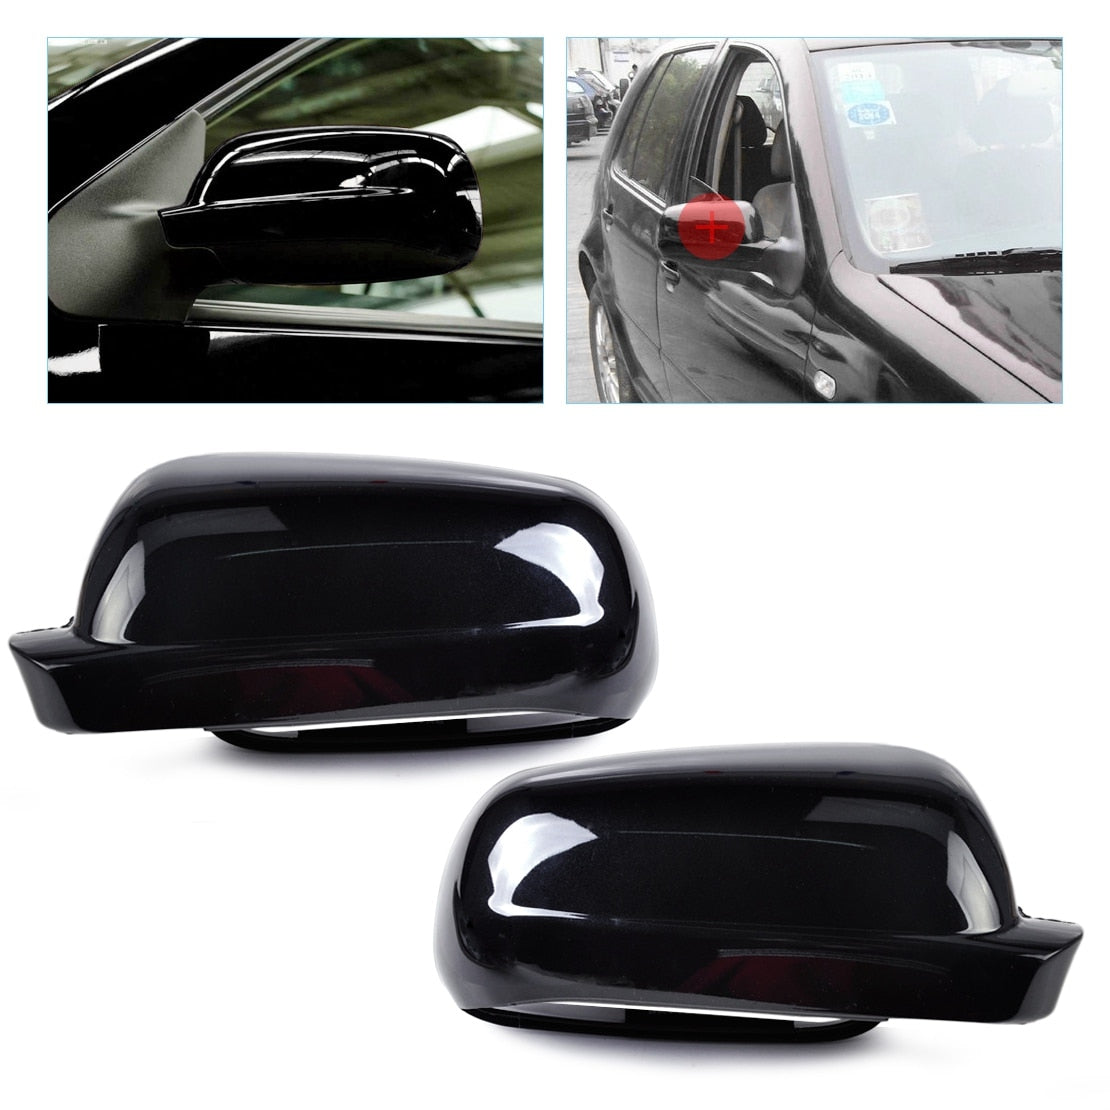 1PC x Right Rearview Wing Mirror Cover Case Cap For Vw Golf Mk4 Passat B5 1998-2005 Jetta 2001 2002 2003 2004